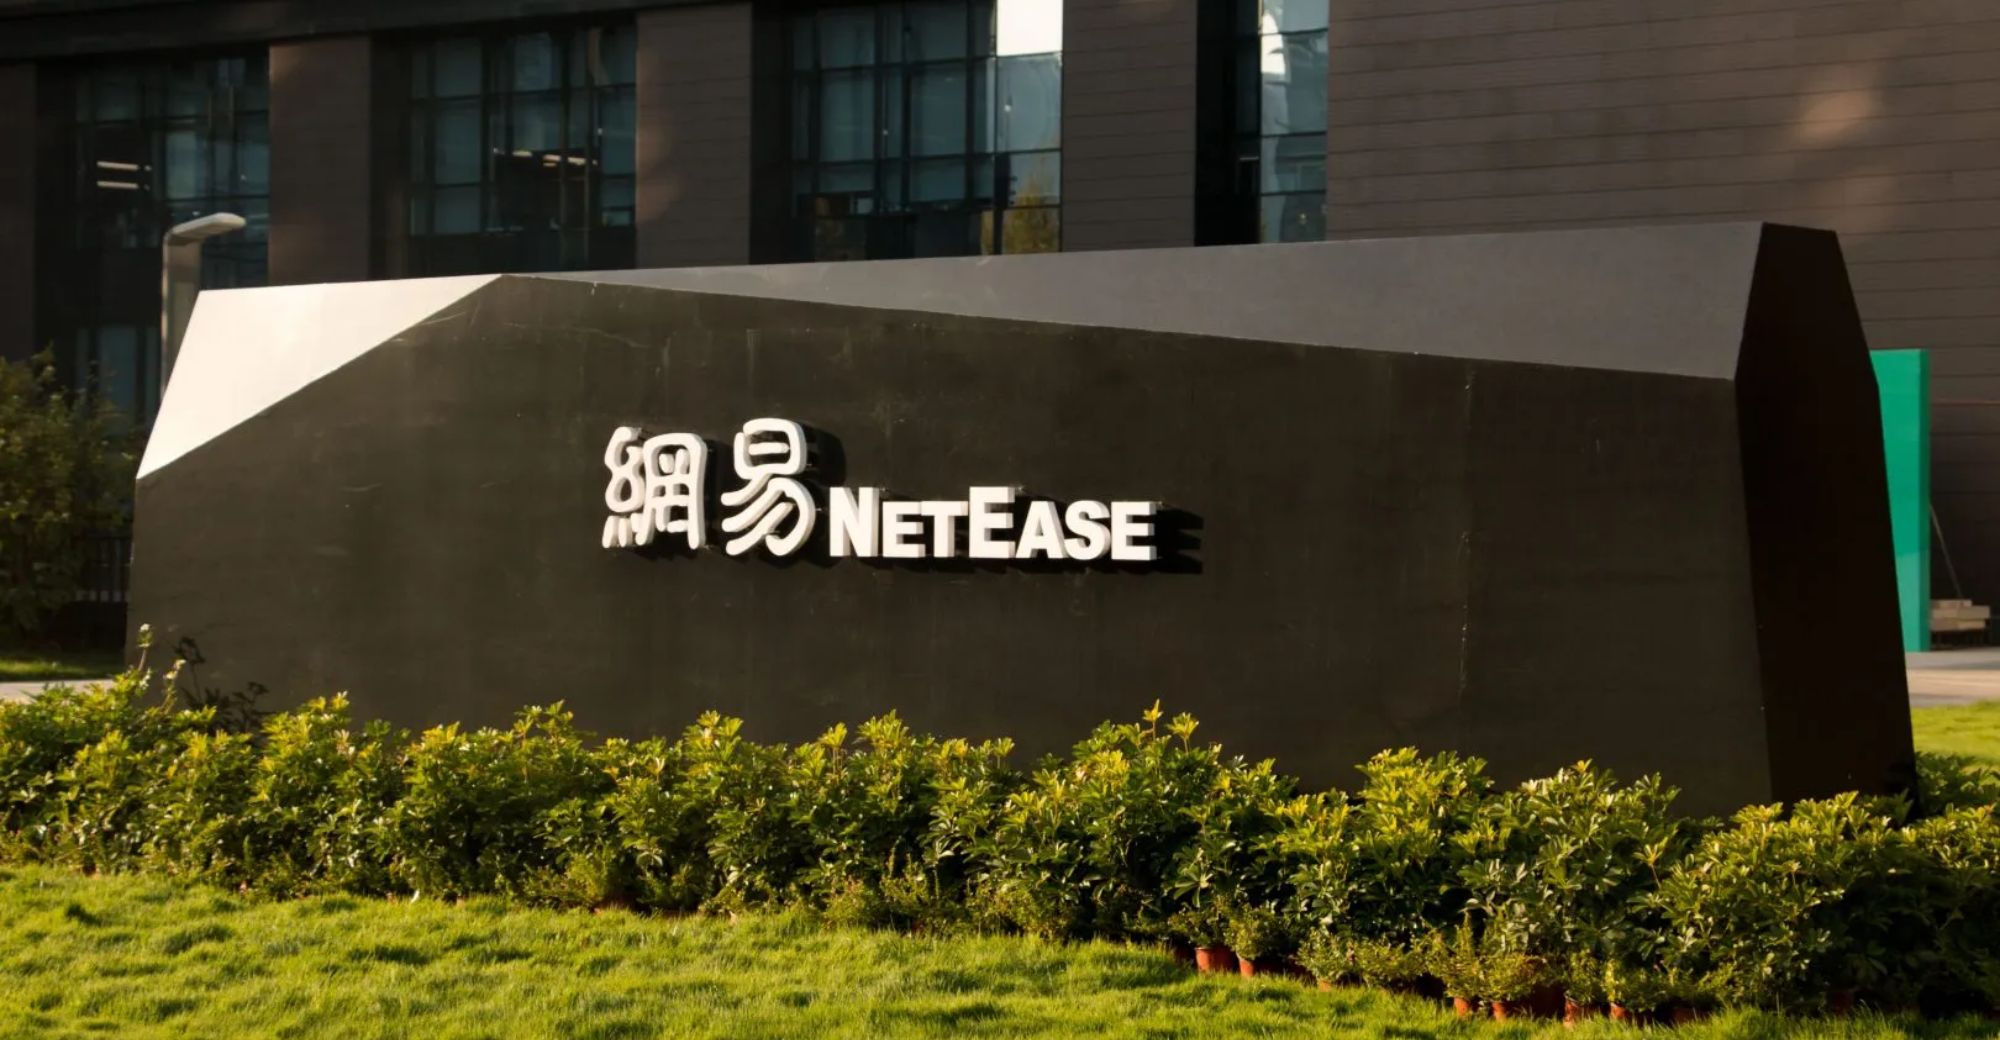 NetEase Surpasses Meituan, Becoming the Fourth Largest Internet Company in China by Market Value